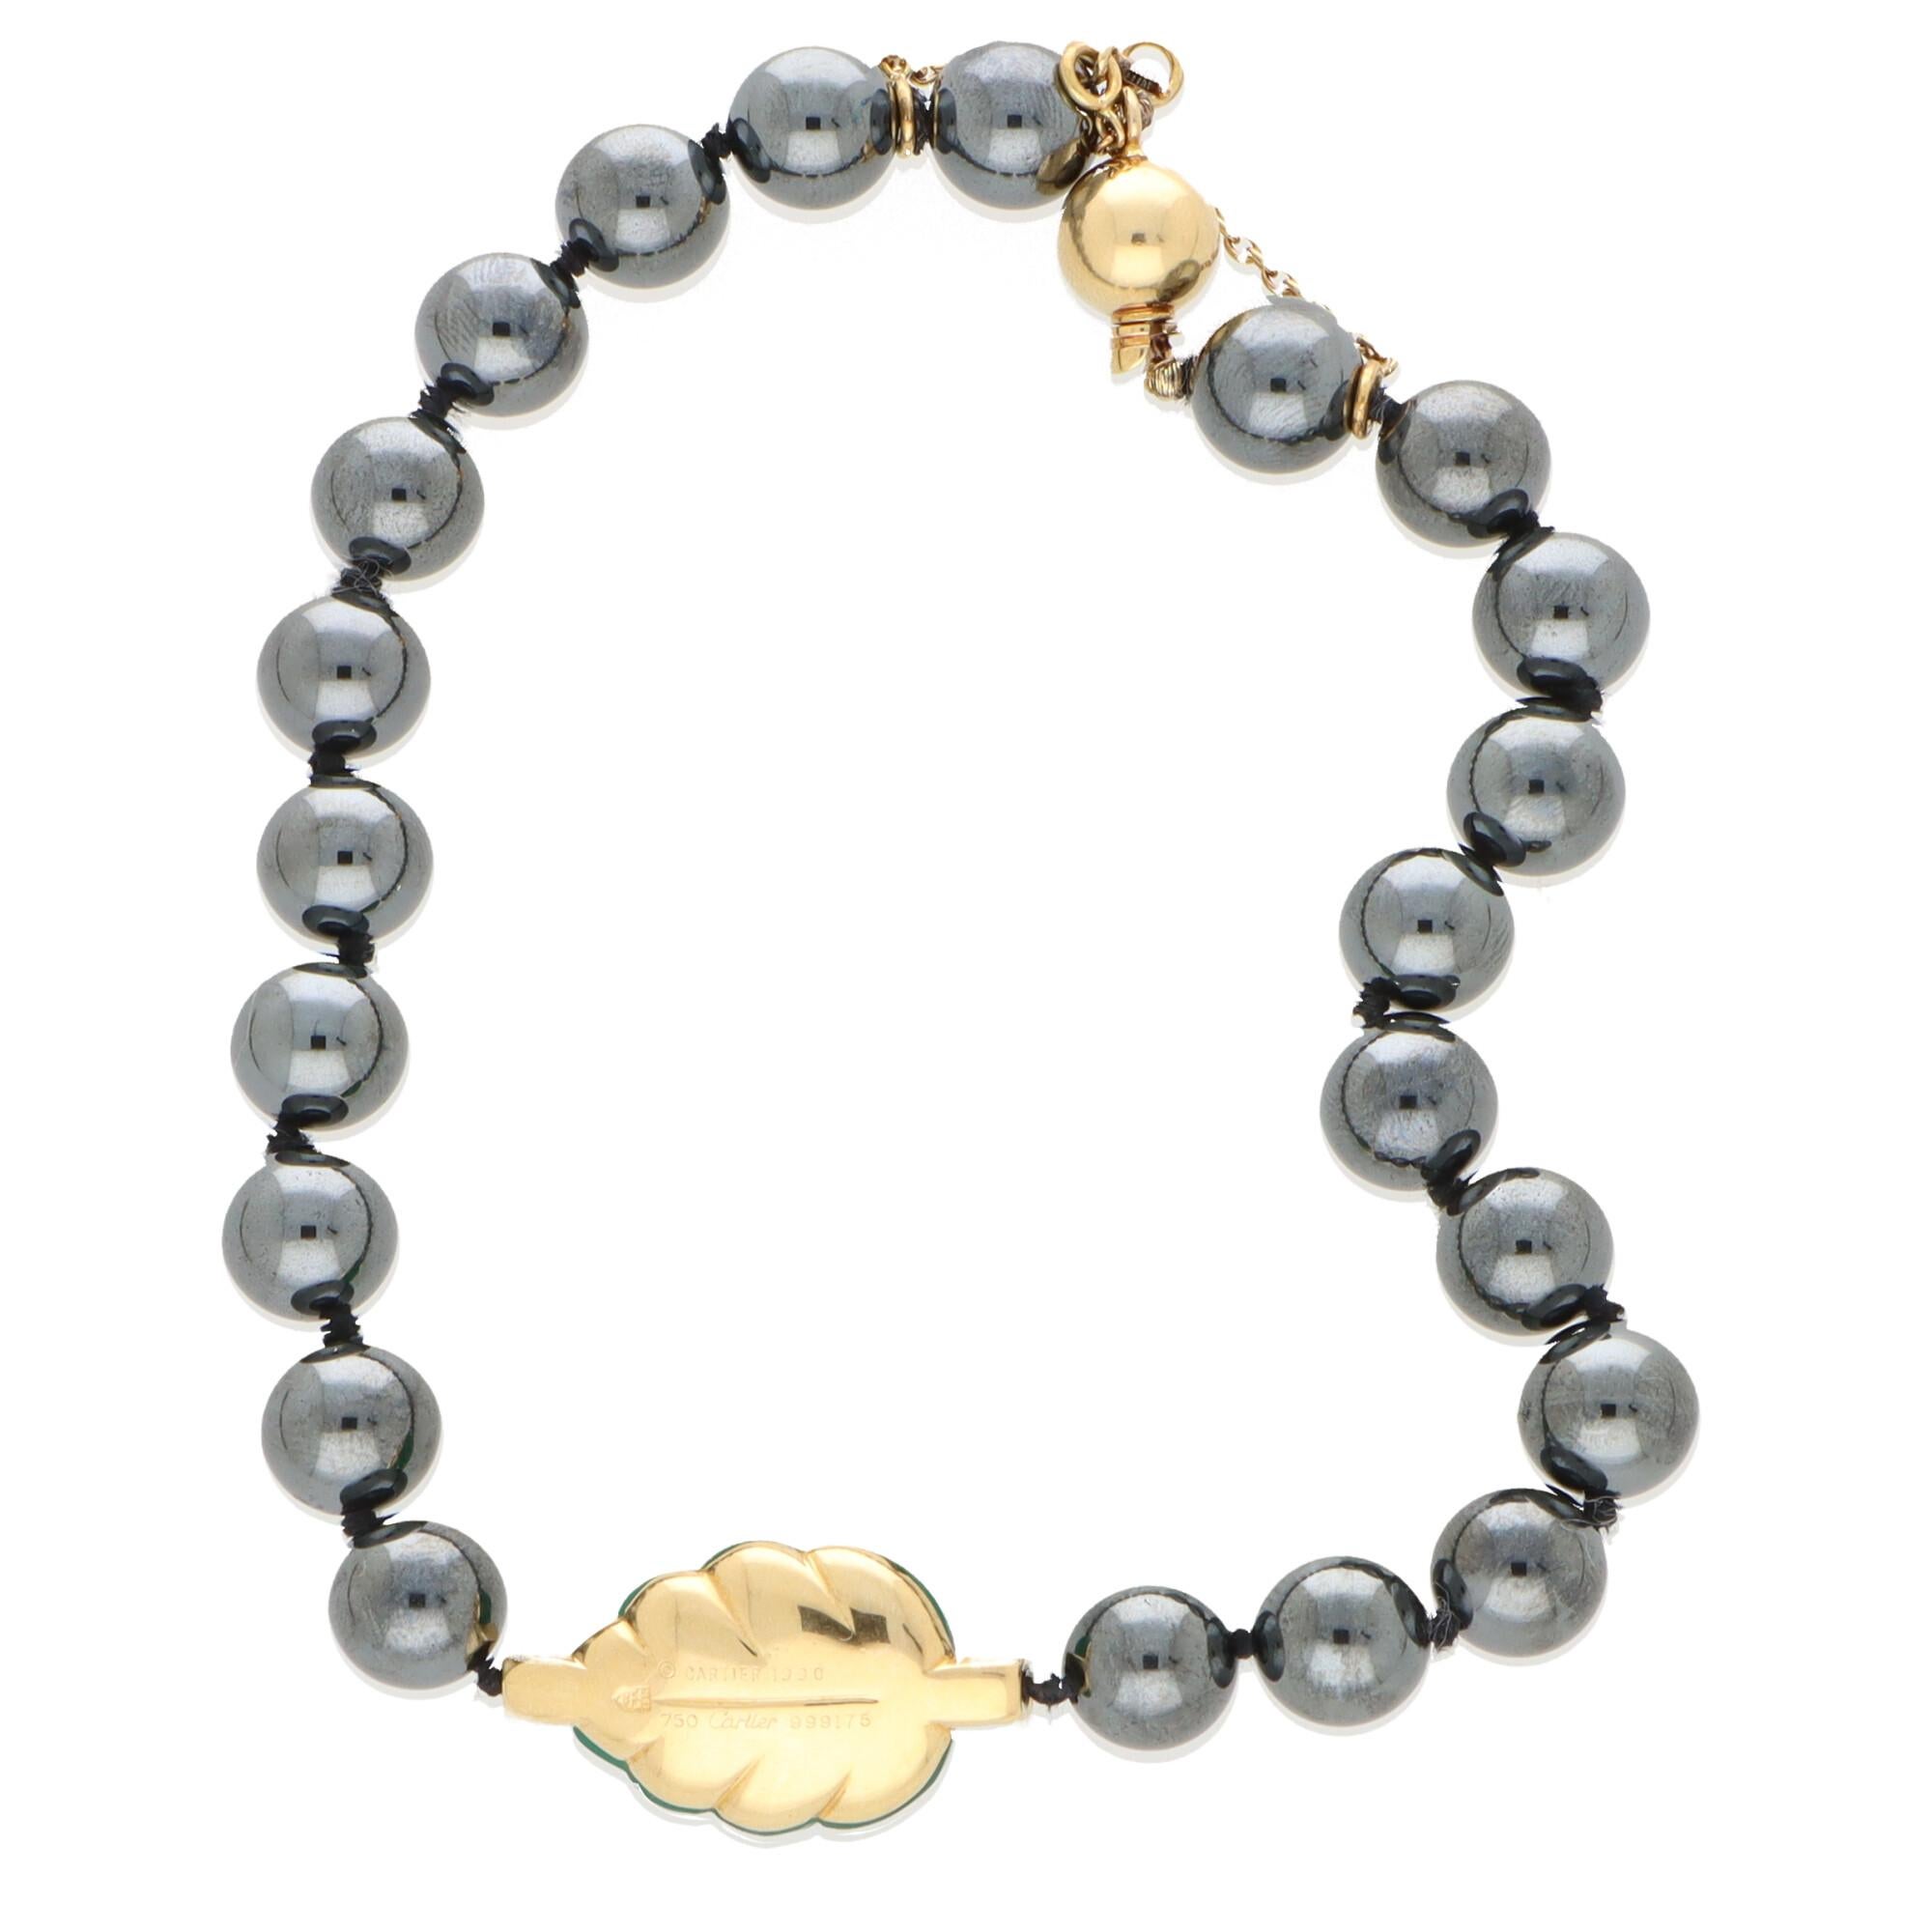 A truly beautiful vintage Cartier hematite, chalcedony and diamond beaded bracelet set in 18k yellow gold. 

The bracelet is composed of 22 round hematite beads which have a fantastic striking metallic lustre. Set centrally to the bracelet is a